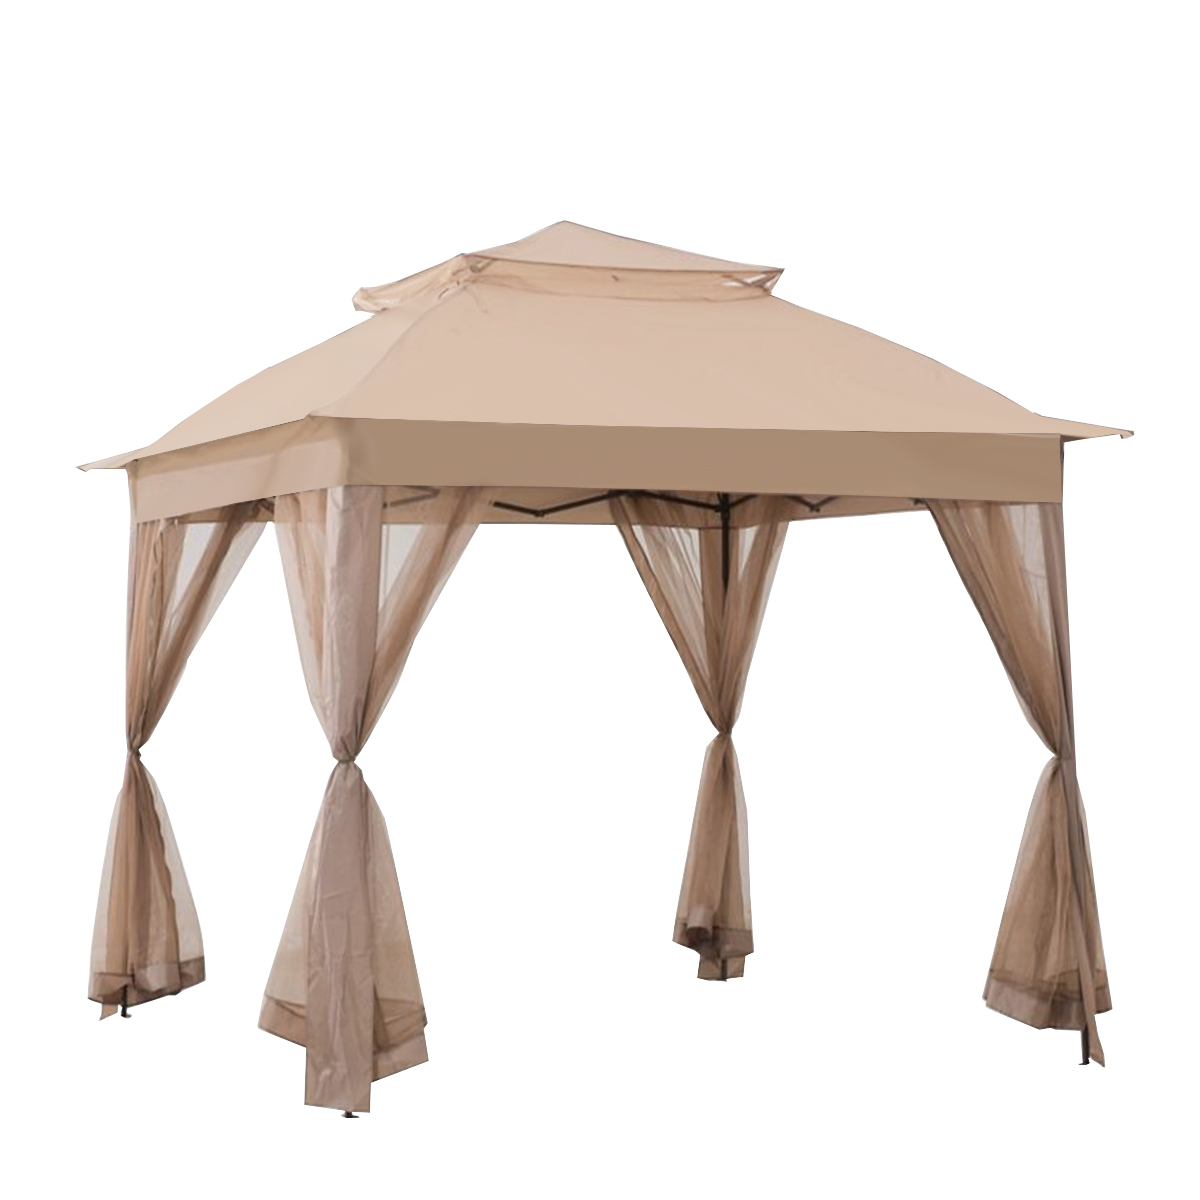 Replacement Canopy for A109000102 11x11 Pop Up Gazebo - RipLock